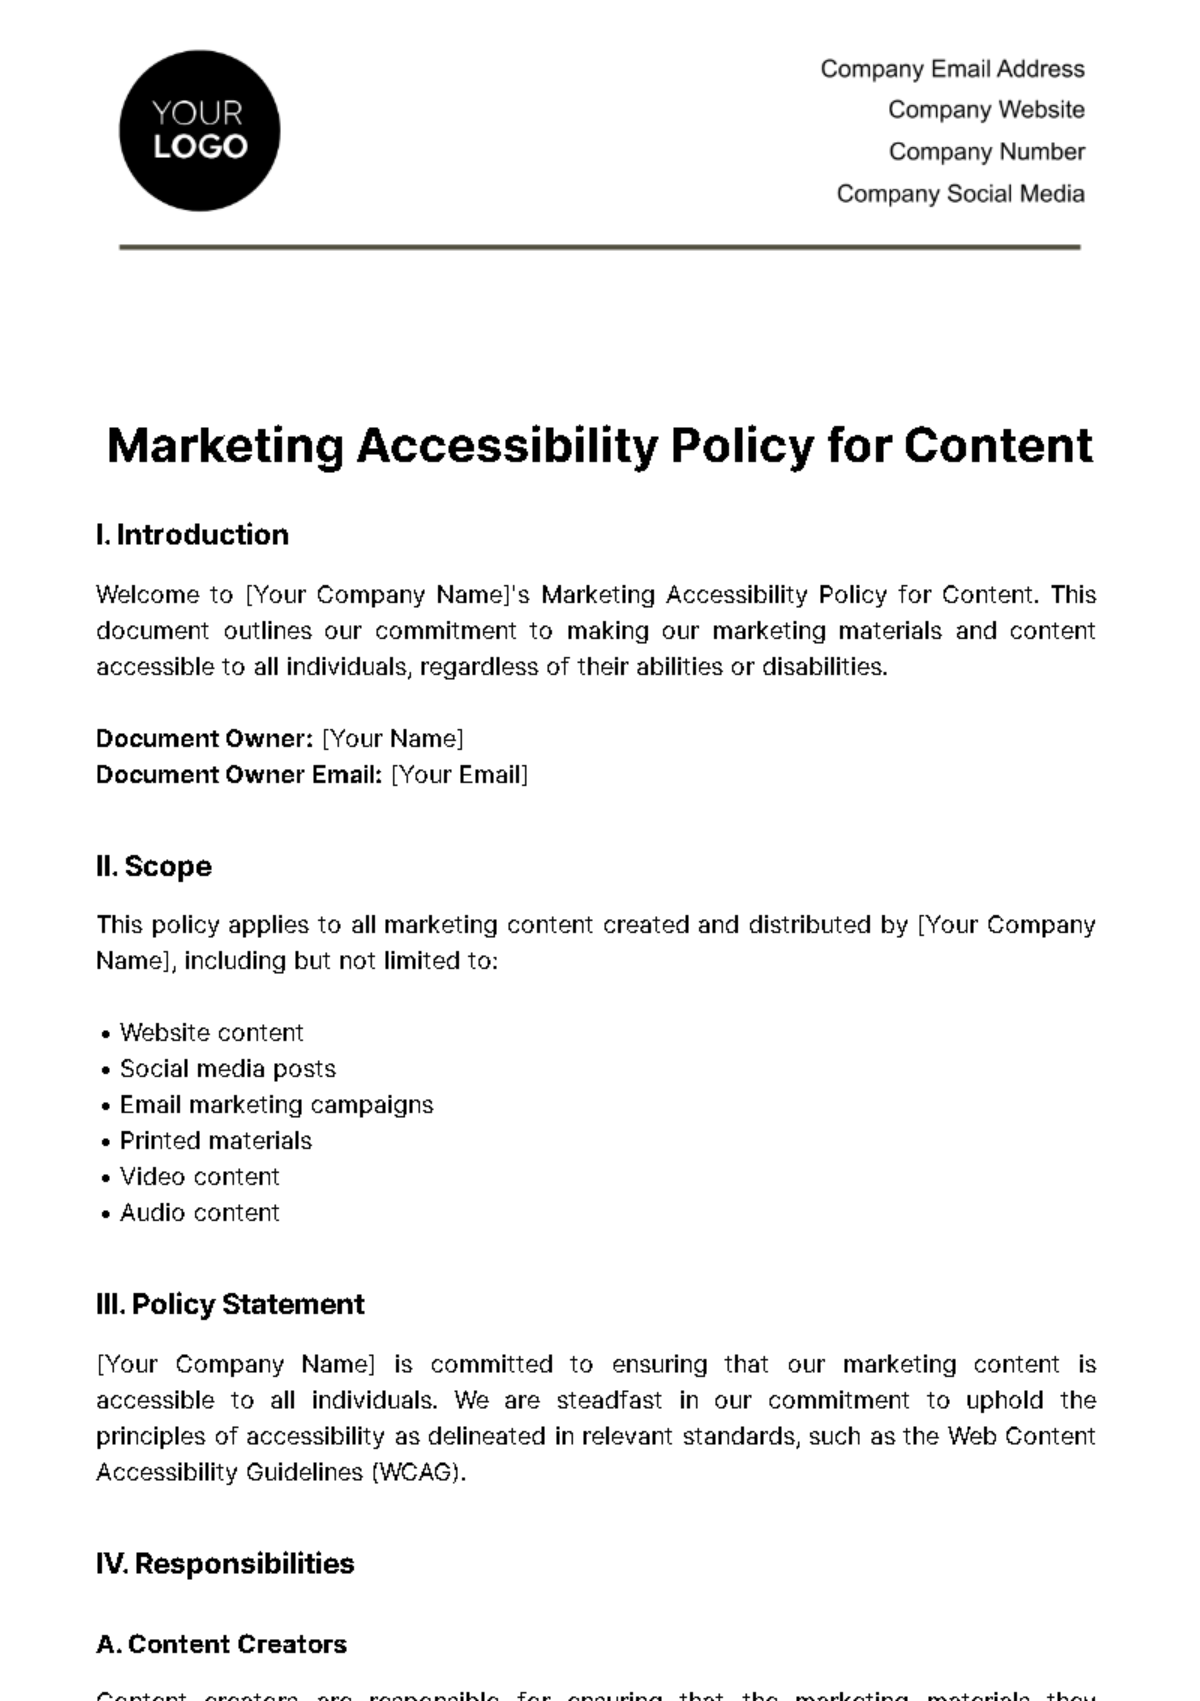 Free Marketing Accessibility Policy for Content Template